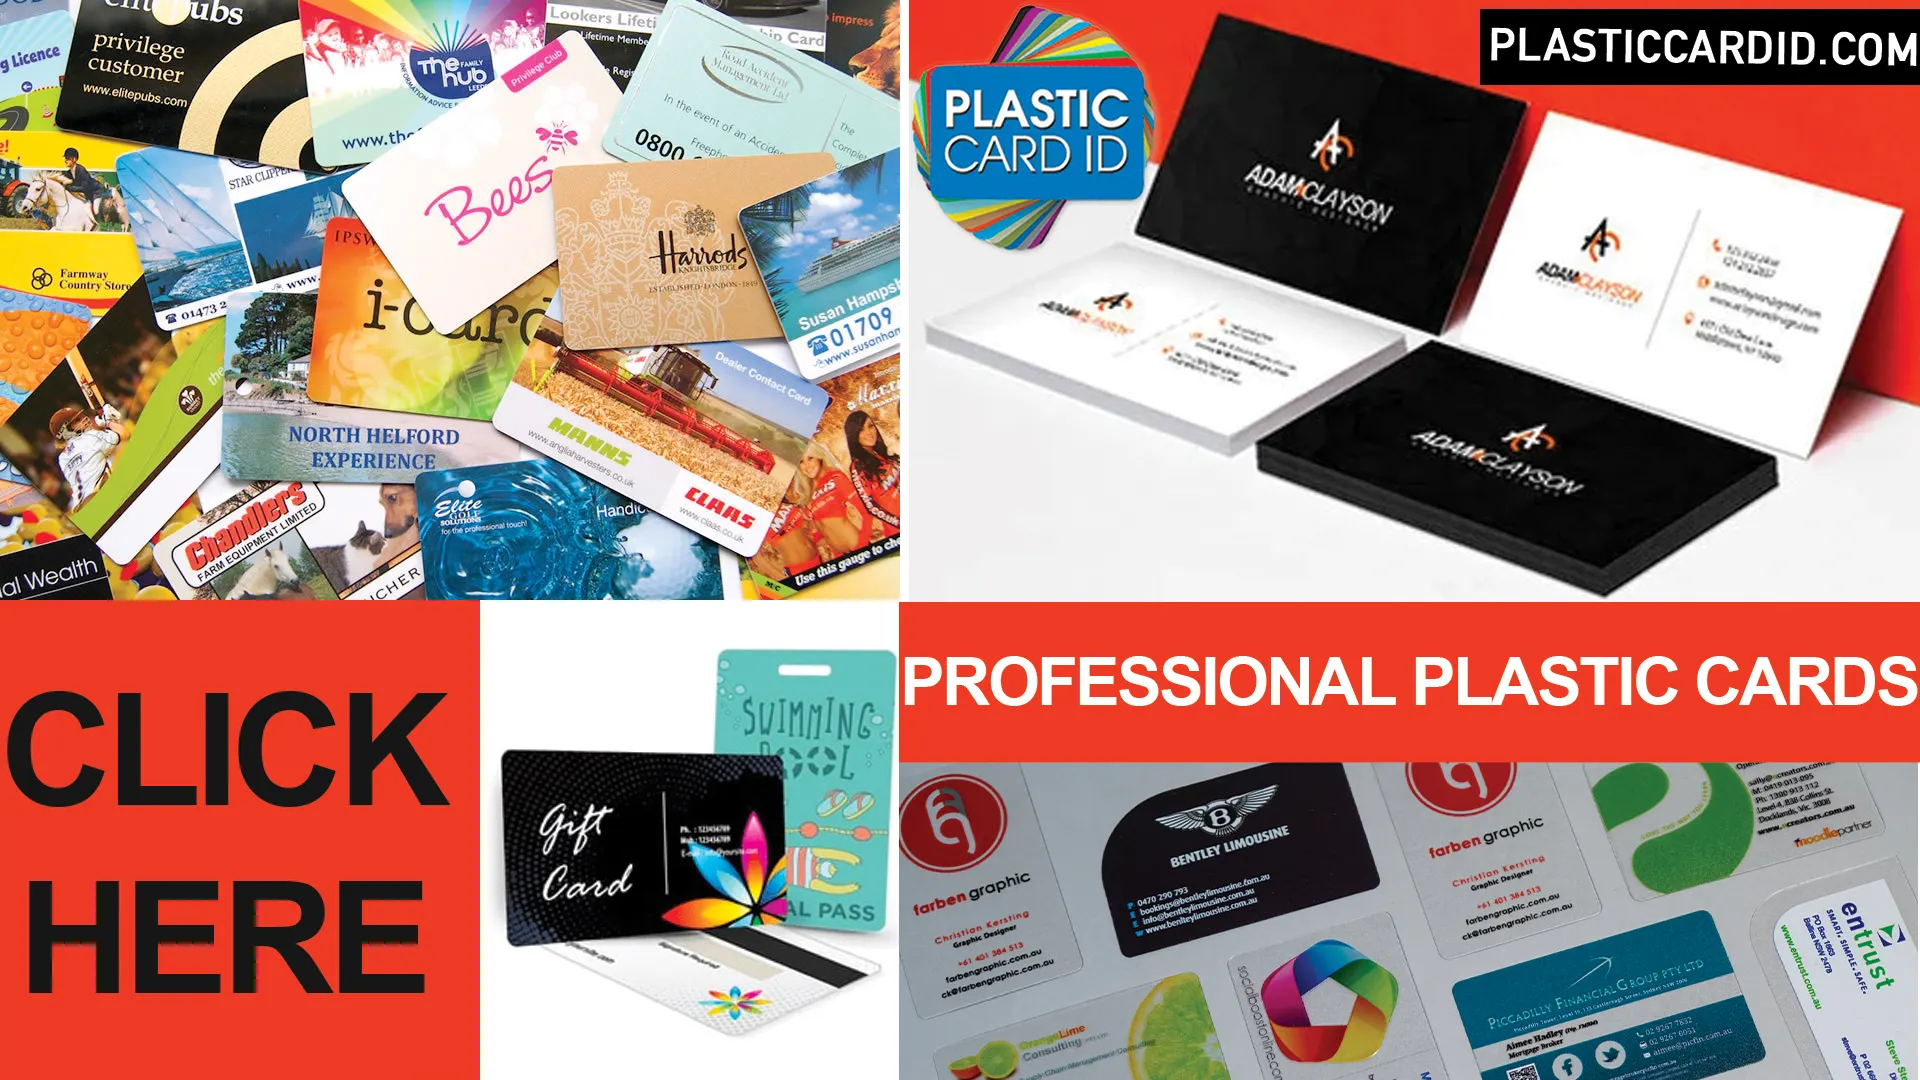 Welcome to Creative Marketing with Plastic Cards